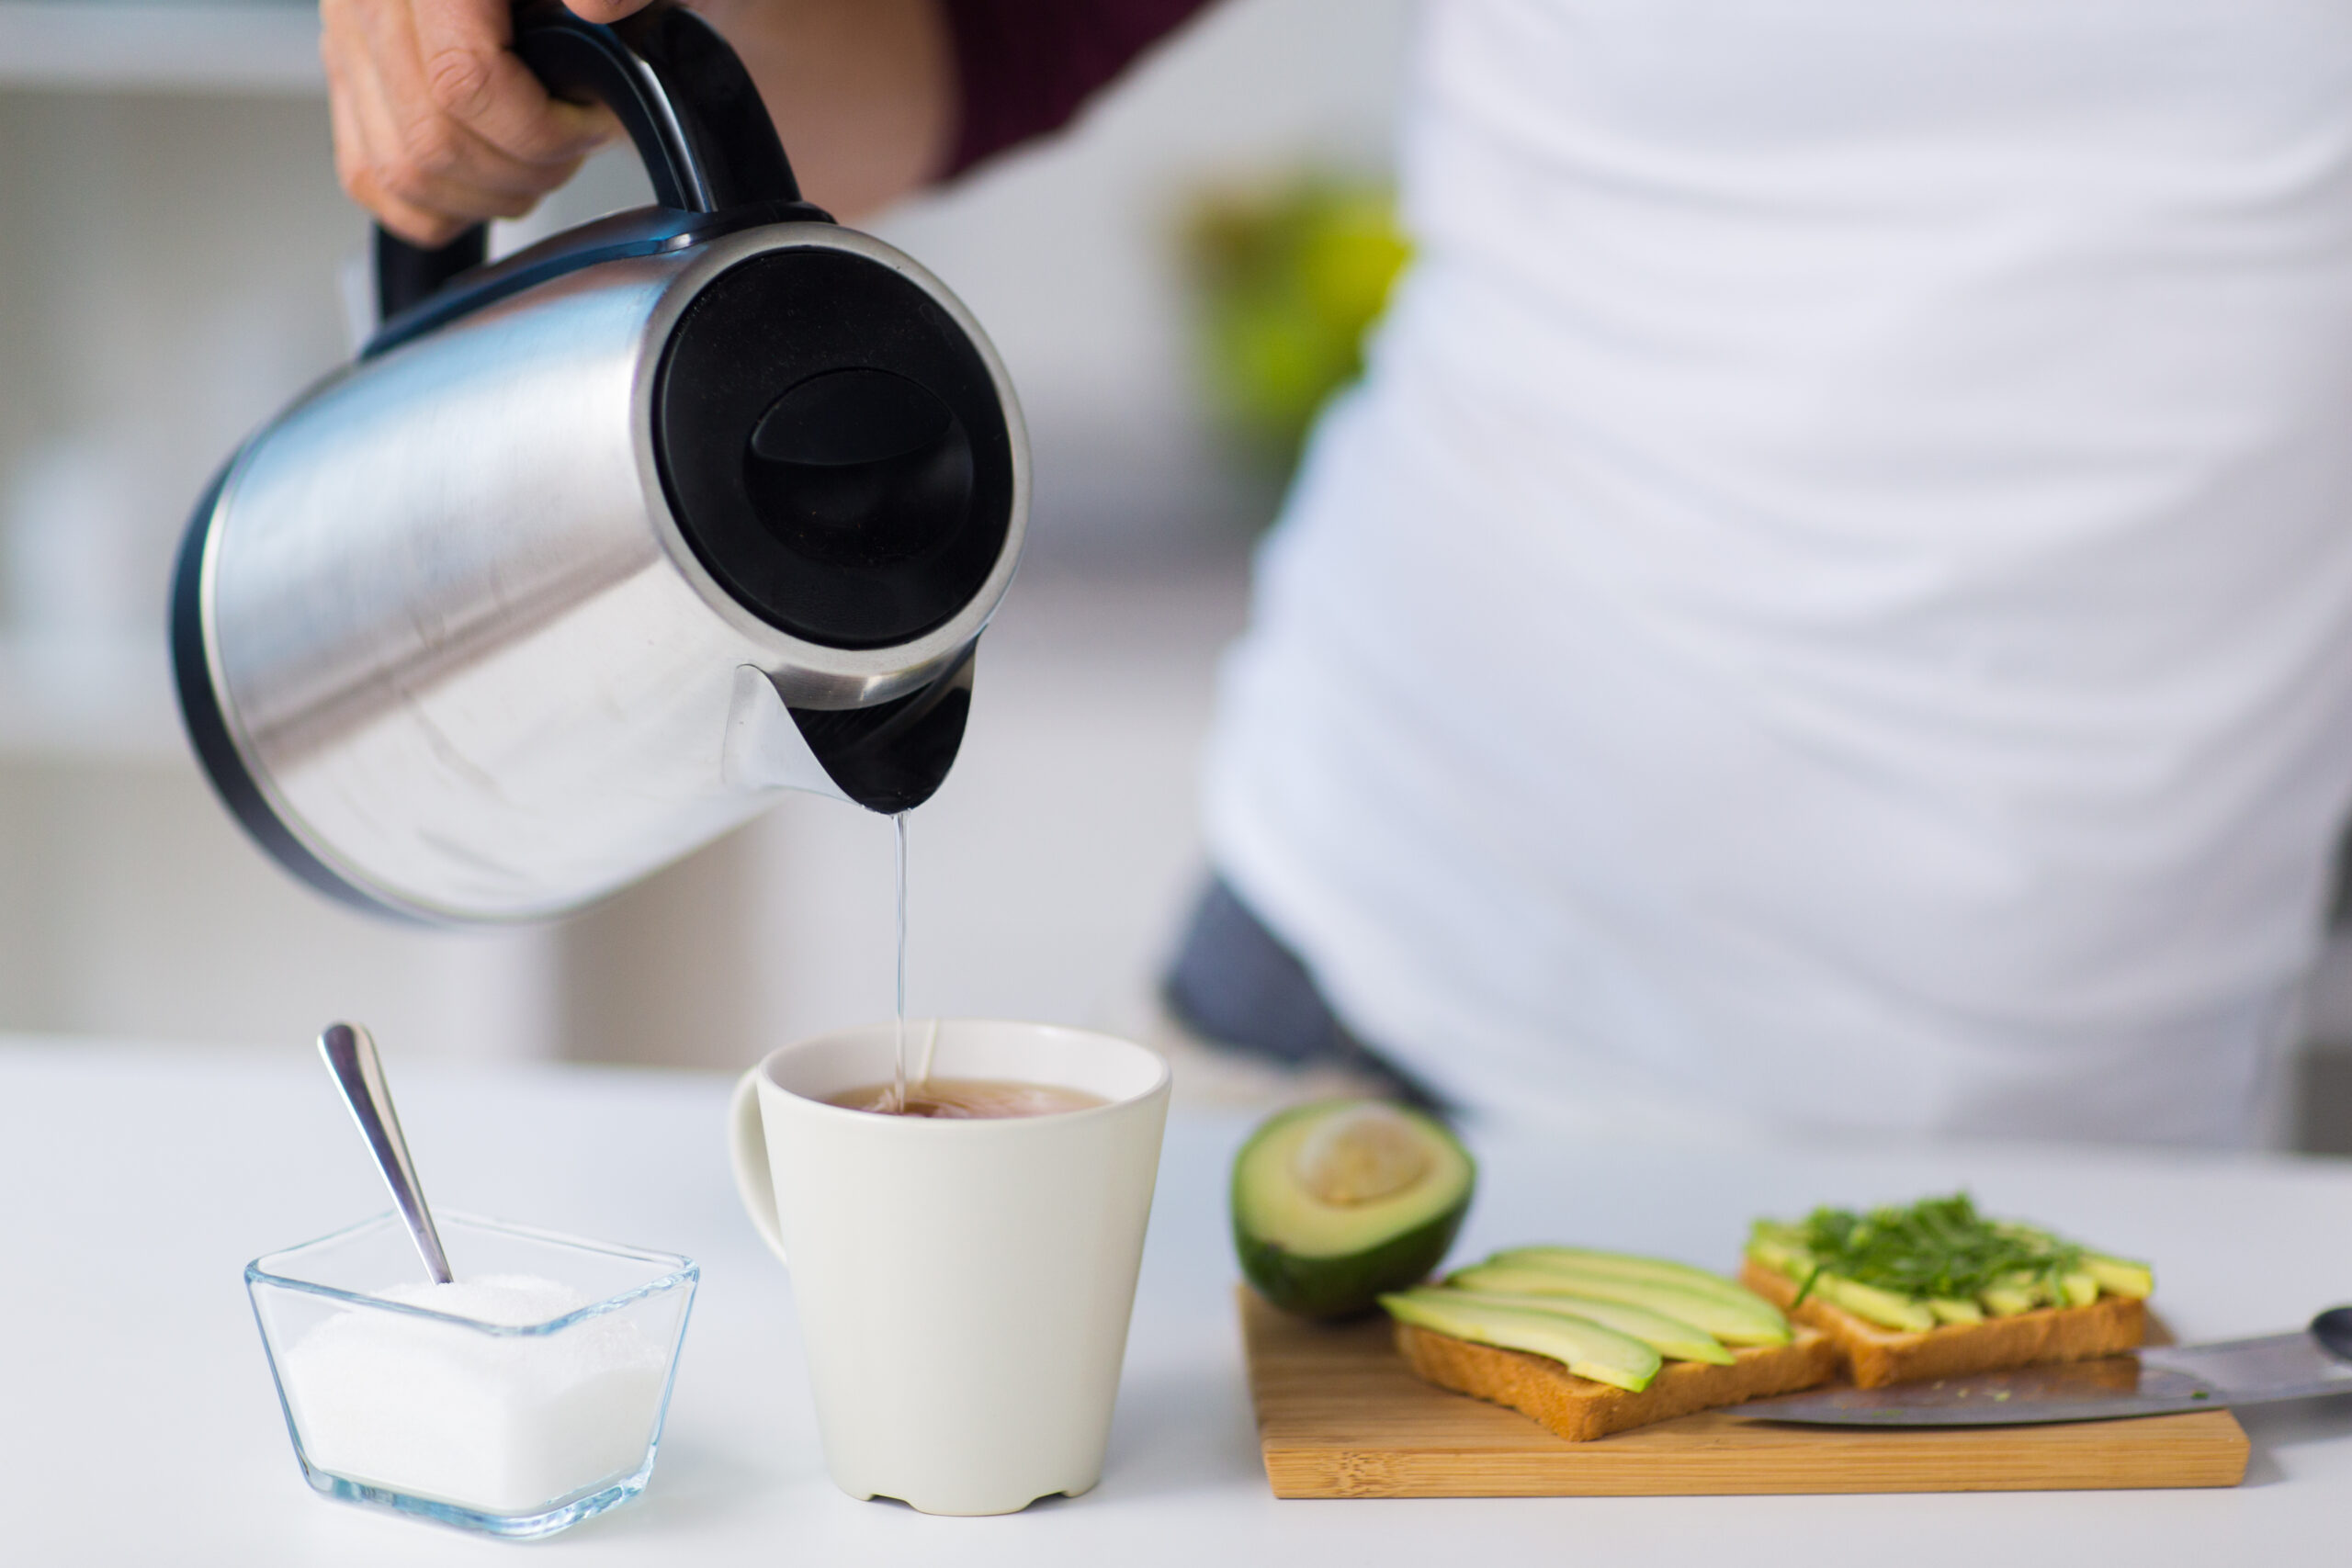 person pouring hot water from electric kettle into mug next to plate of avocado toast